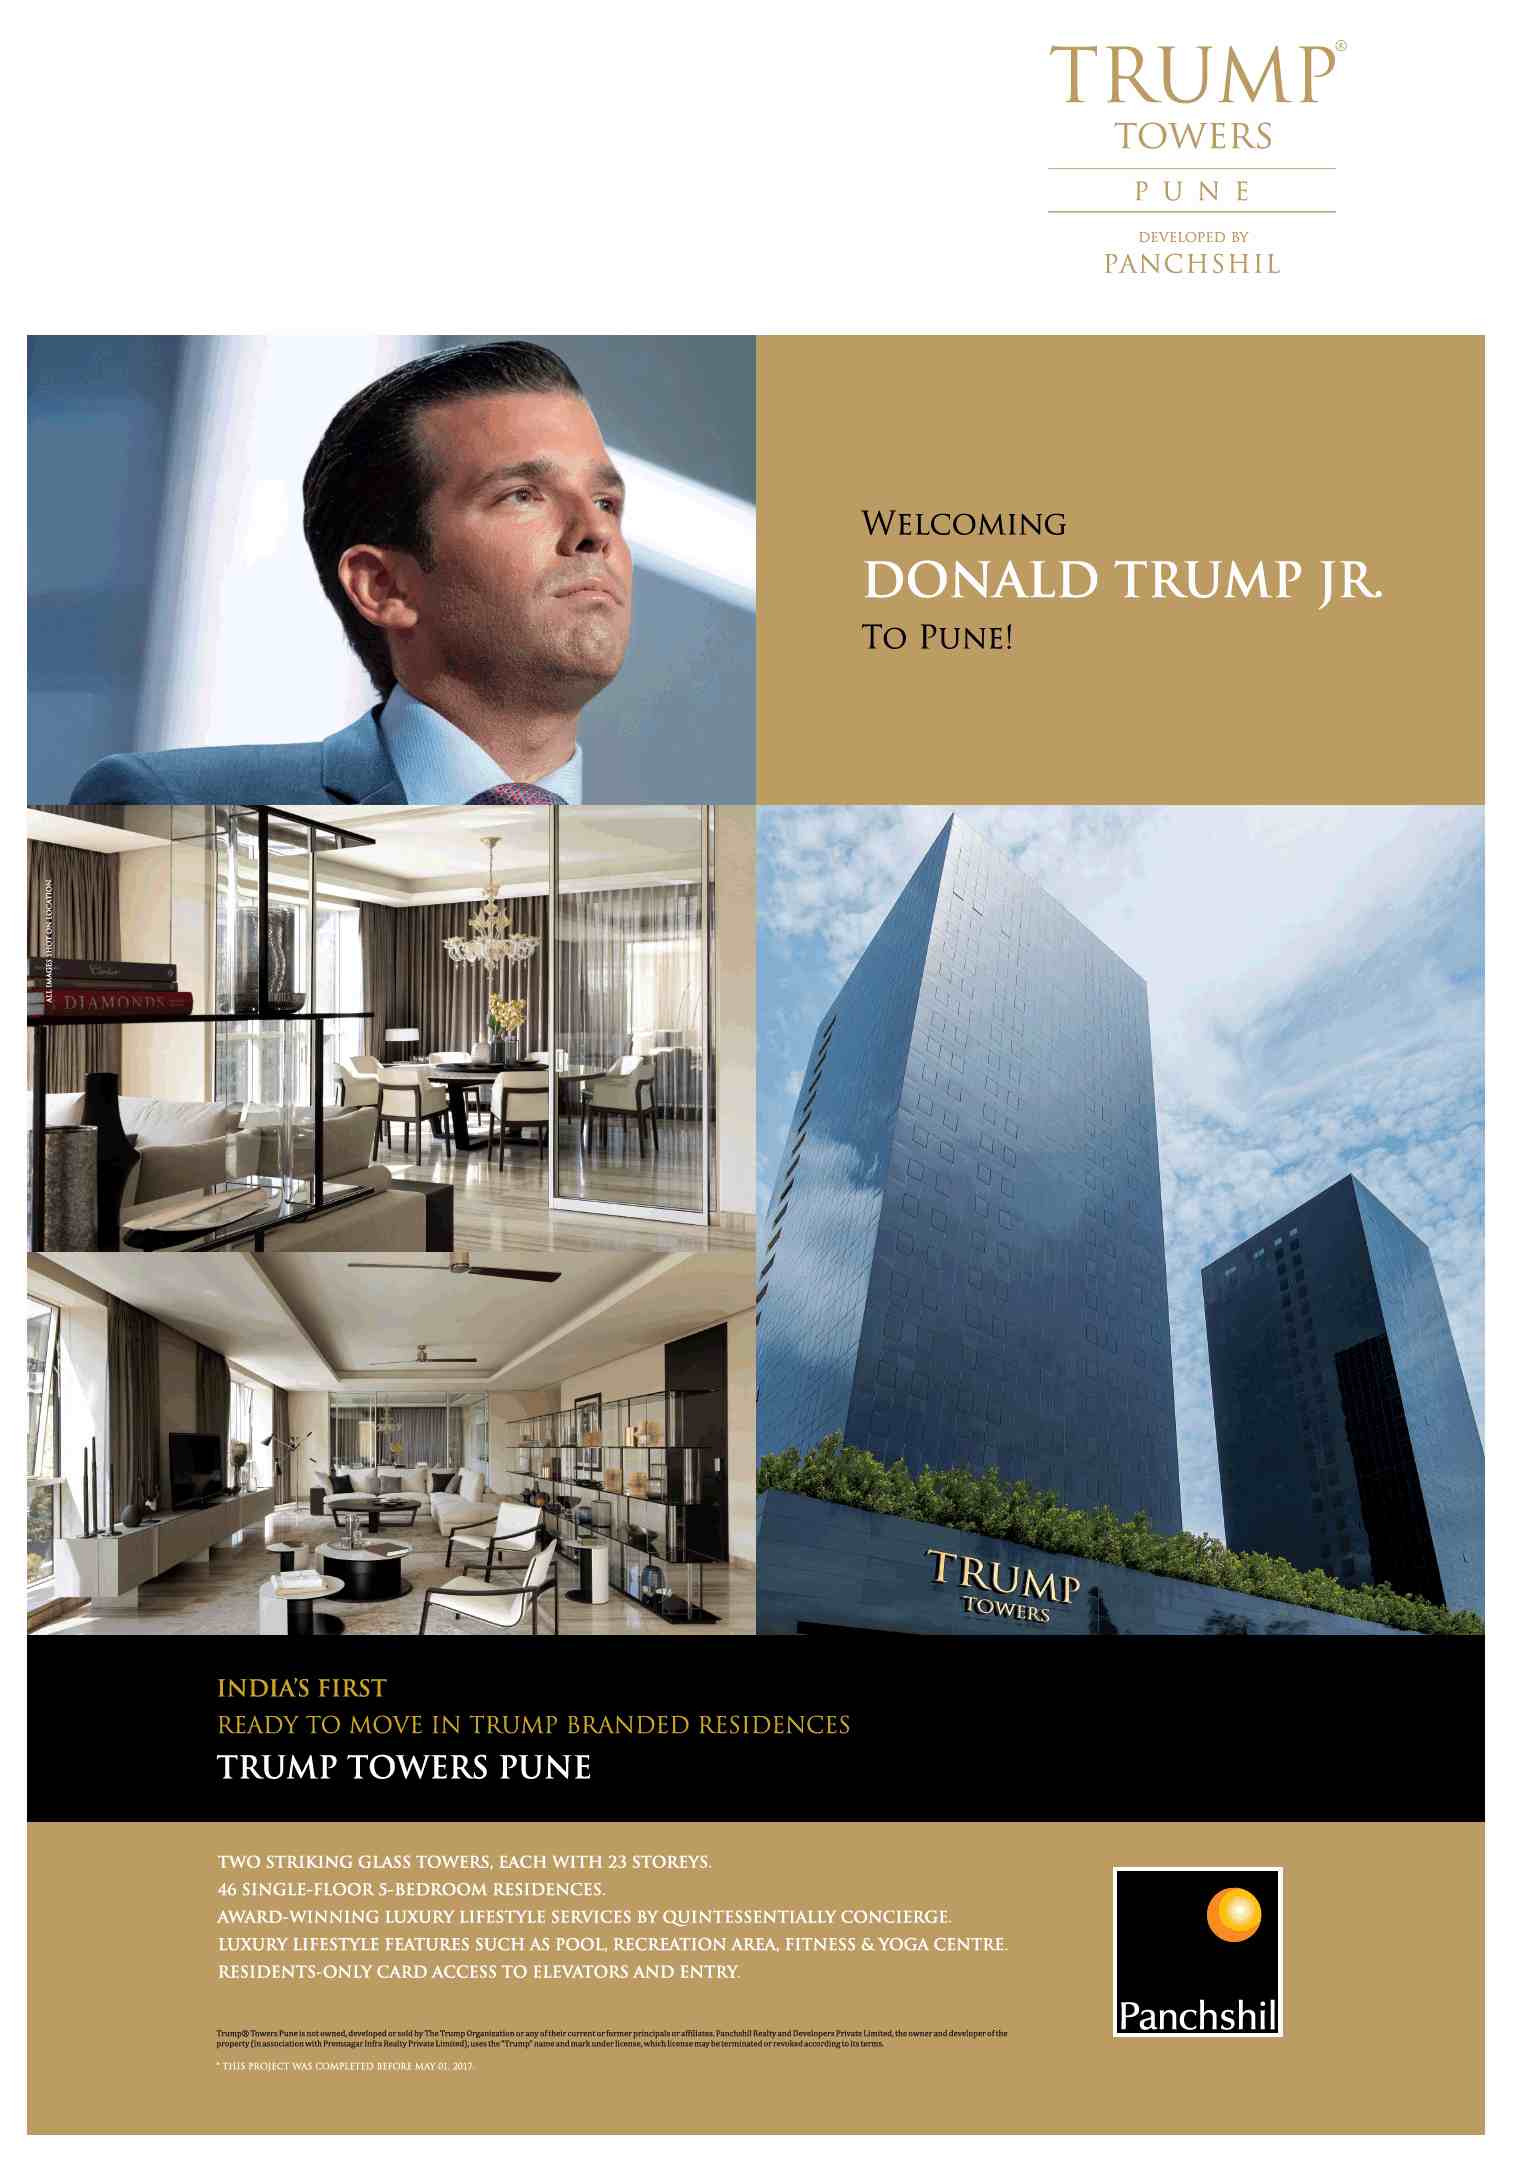 Panchshil Trump Towers India's first ready to move Trump branded residences in Pune Update